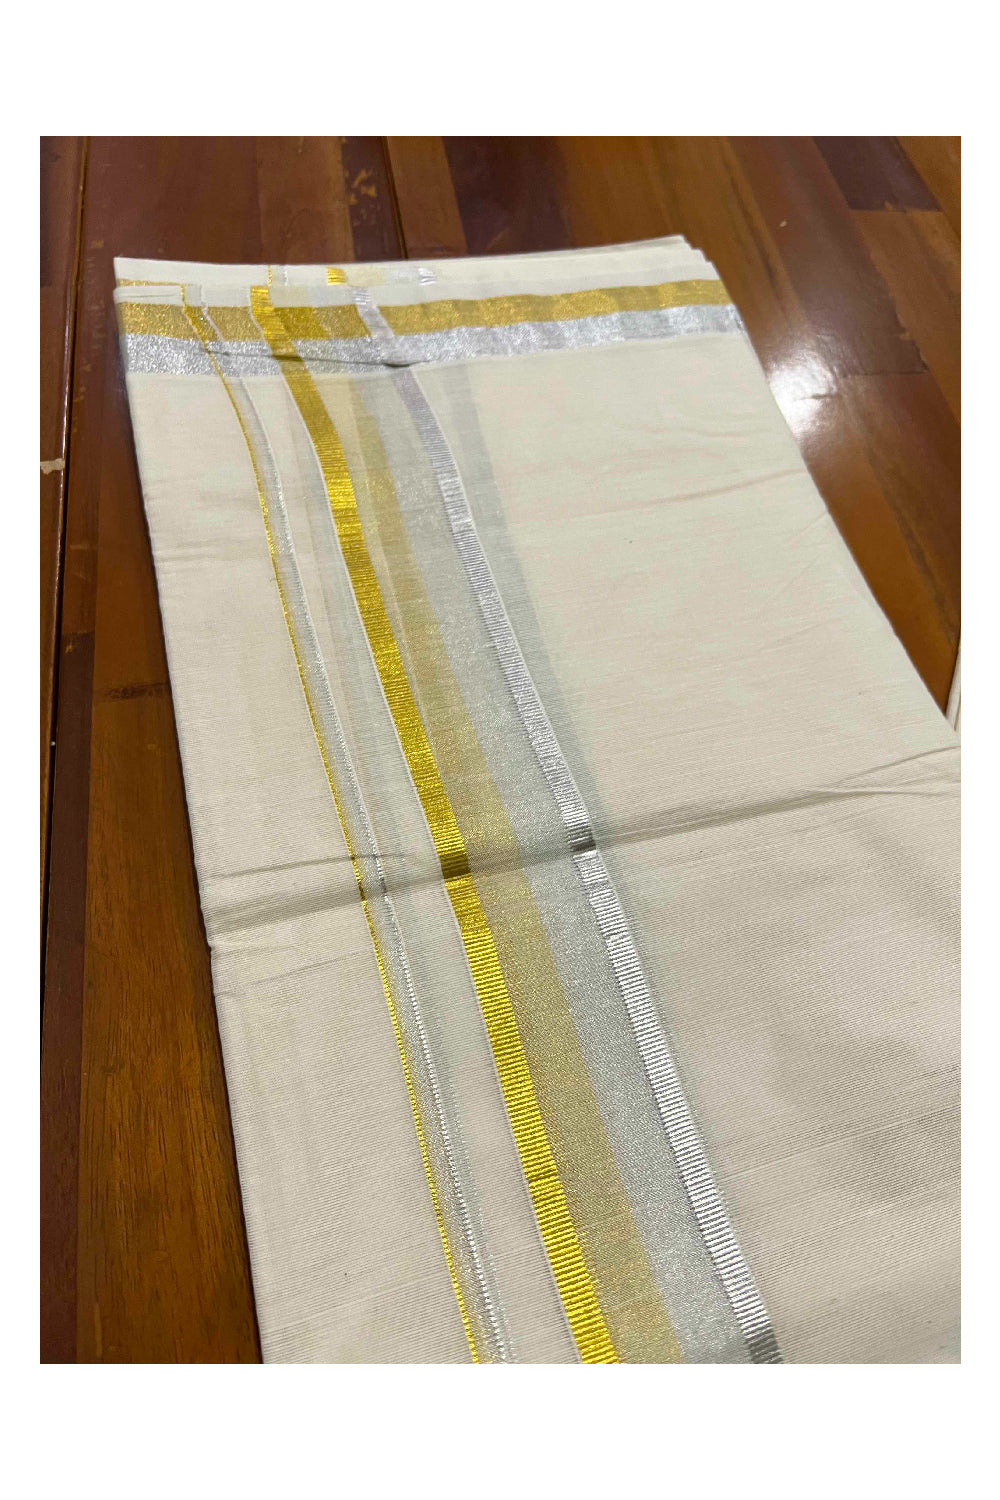 Off White Kerala Double Mundu with Silver and Golden Kasavu Border (South Indian Dhoti)